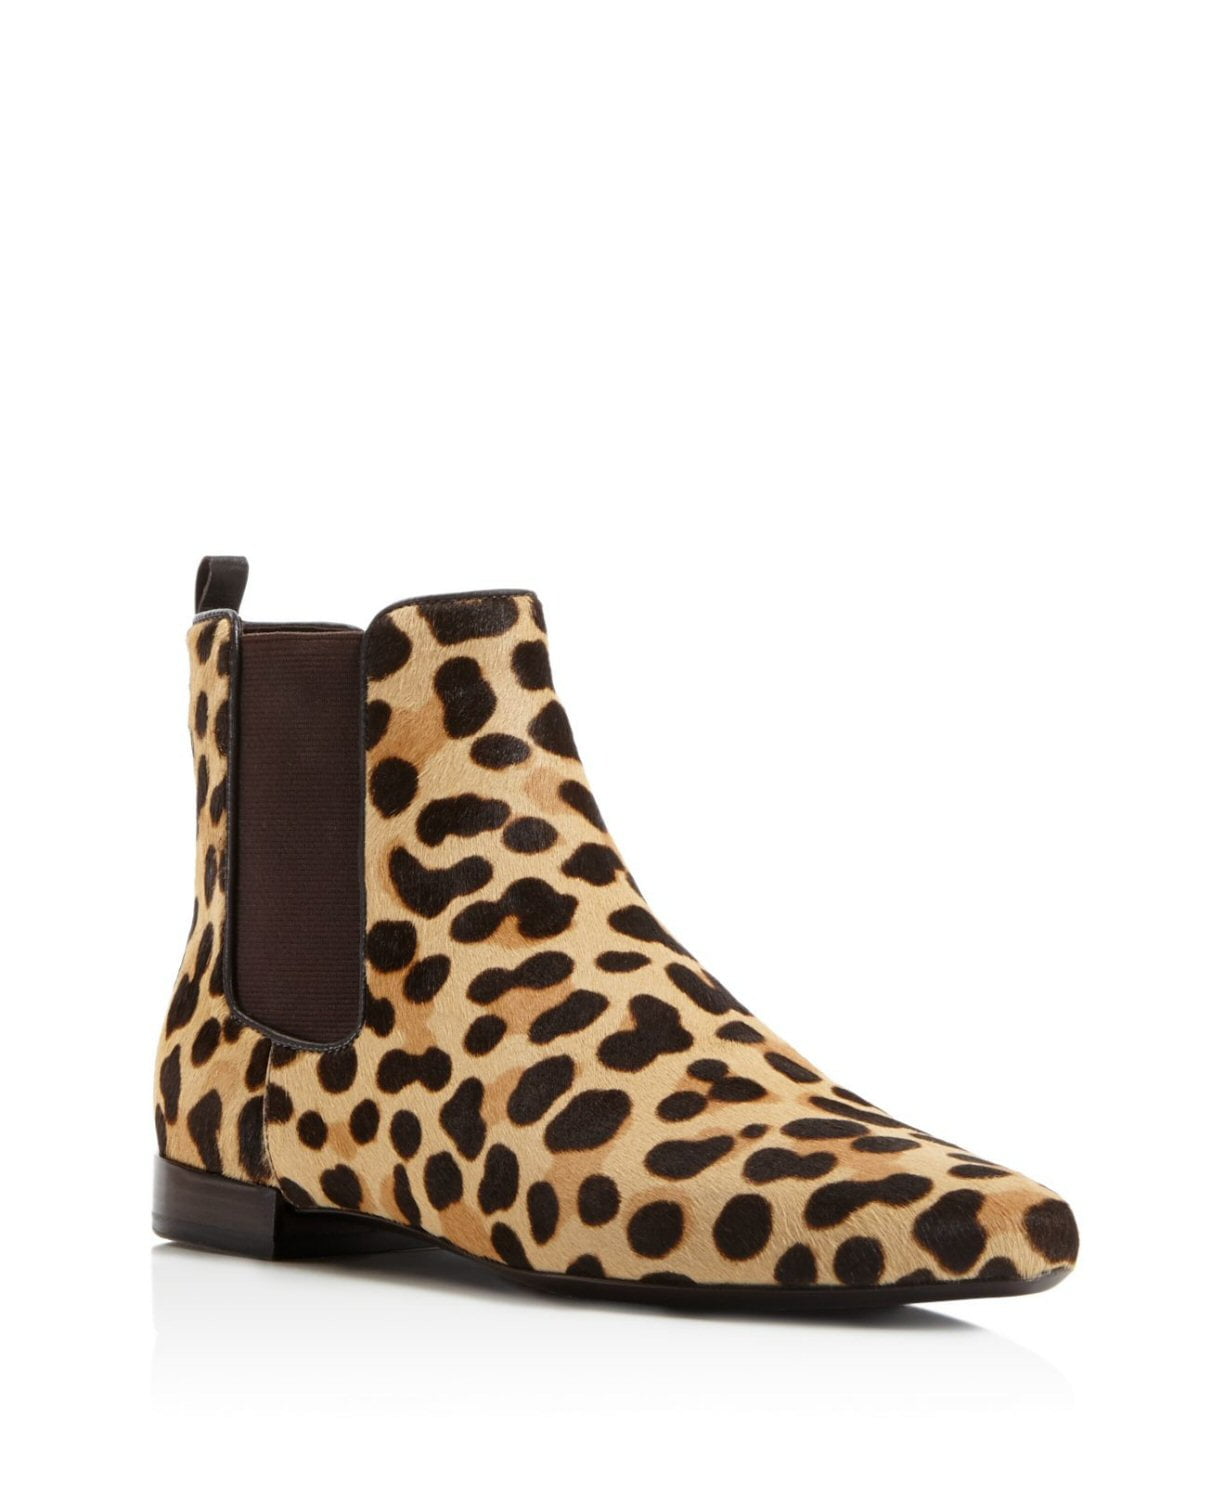 Tory Burch Orsay Calf-Hair Chelsea Ankle Boot 